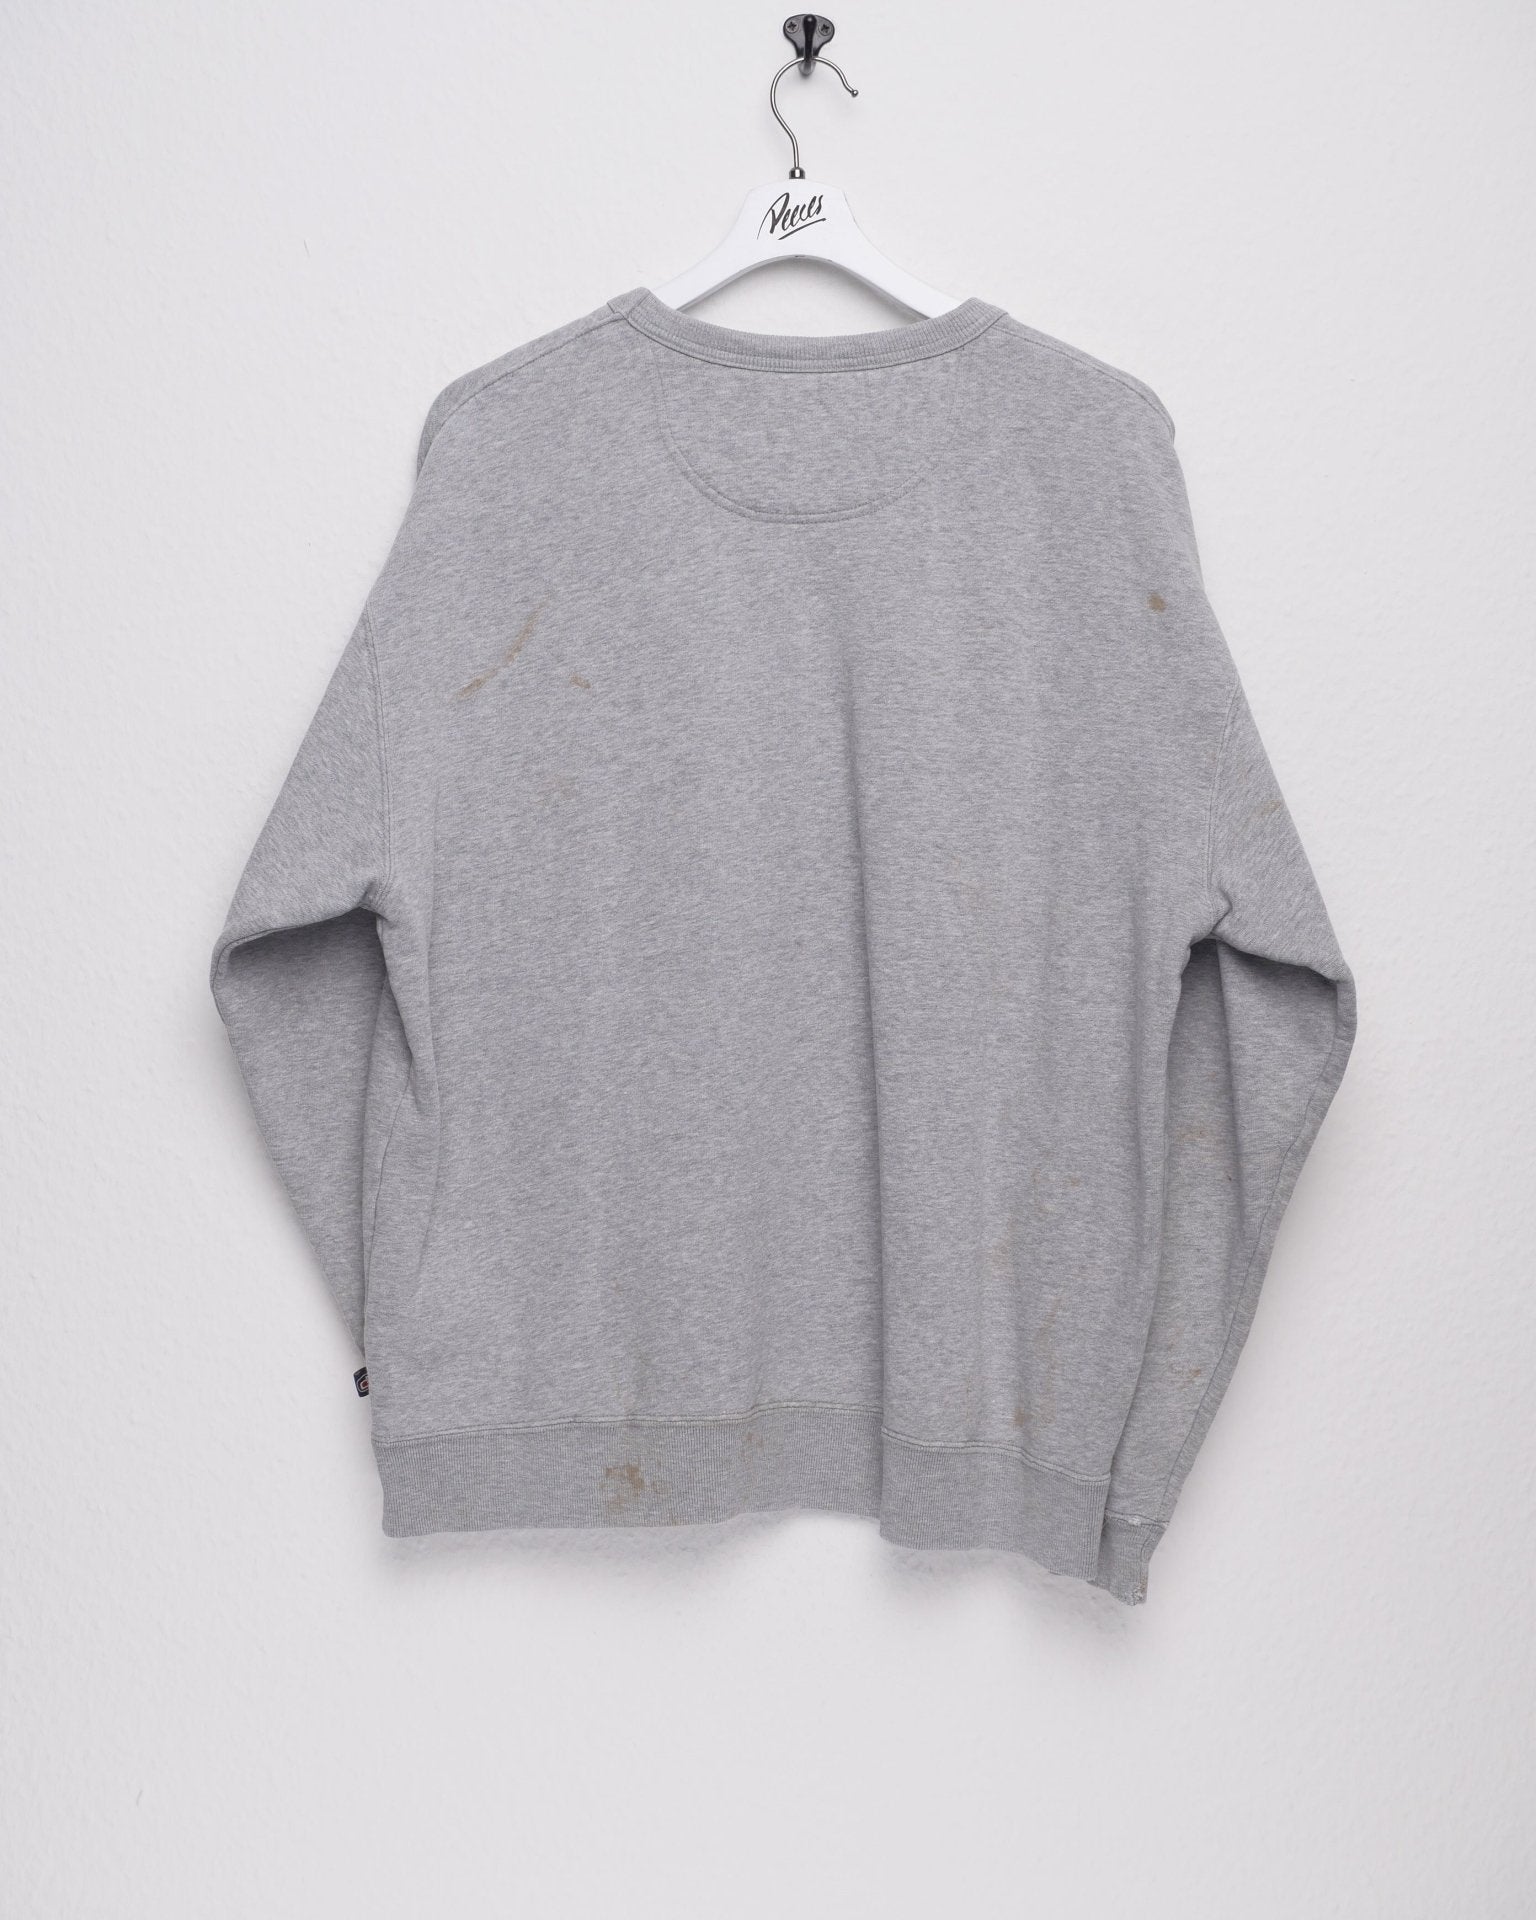 JACO' embroidered Spellout grey Sweater - Peeces